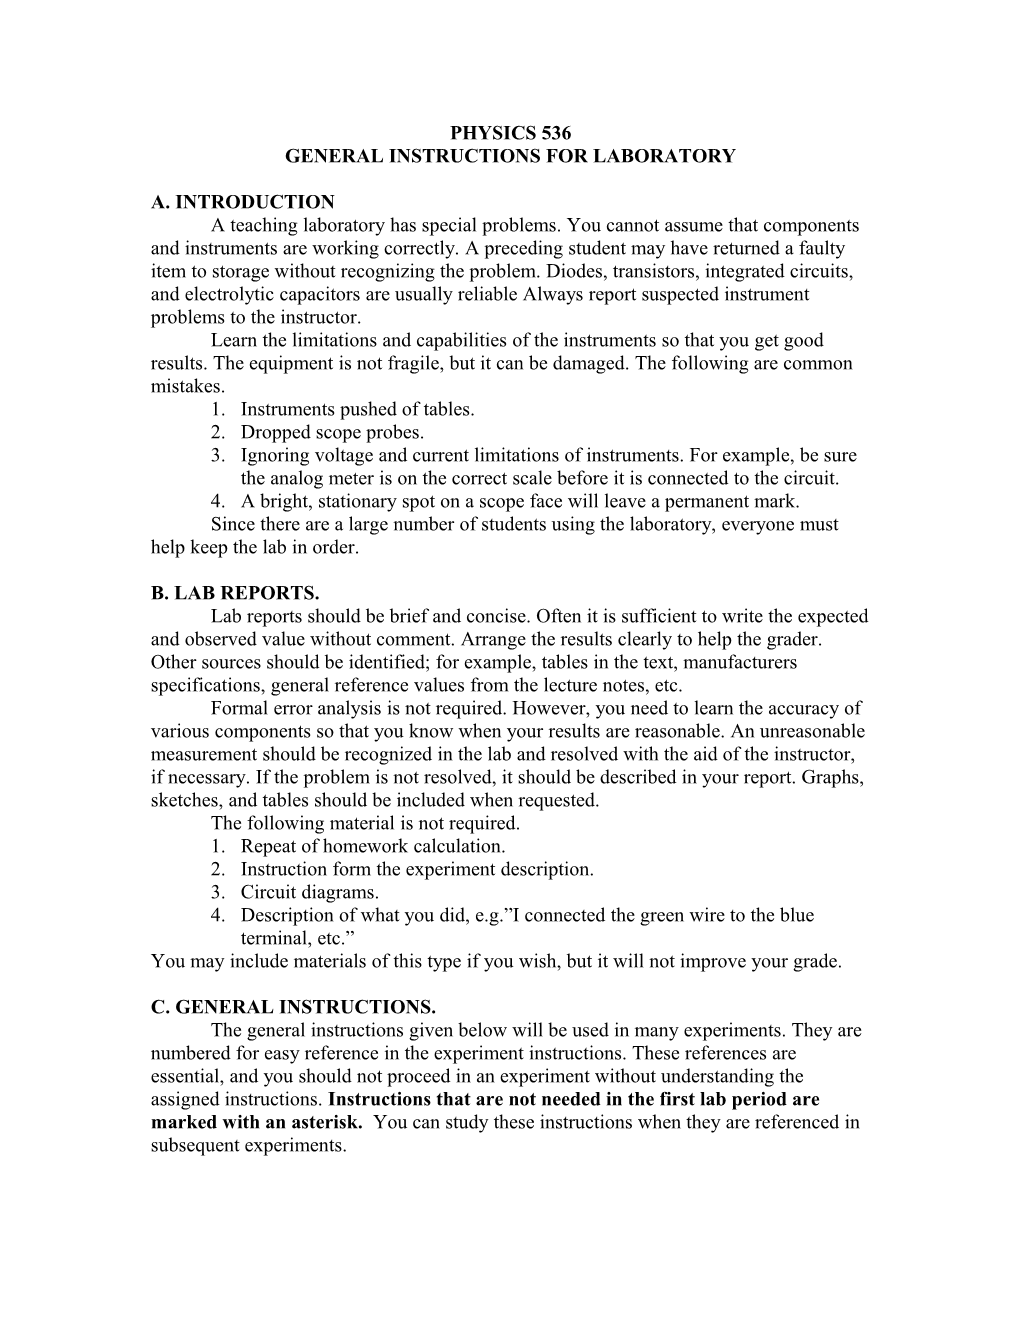 General Instructions for Laboratory